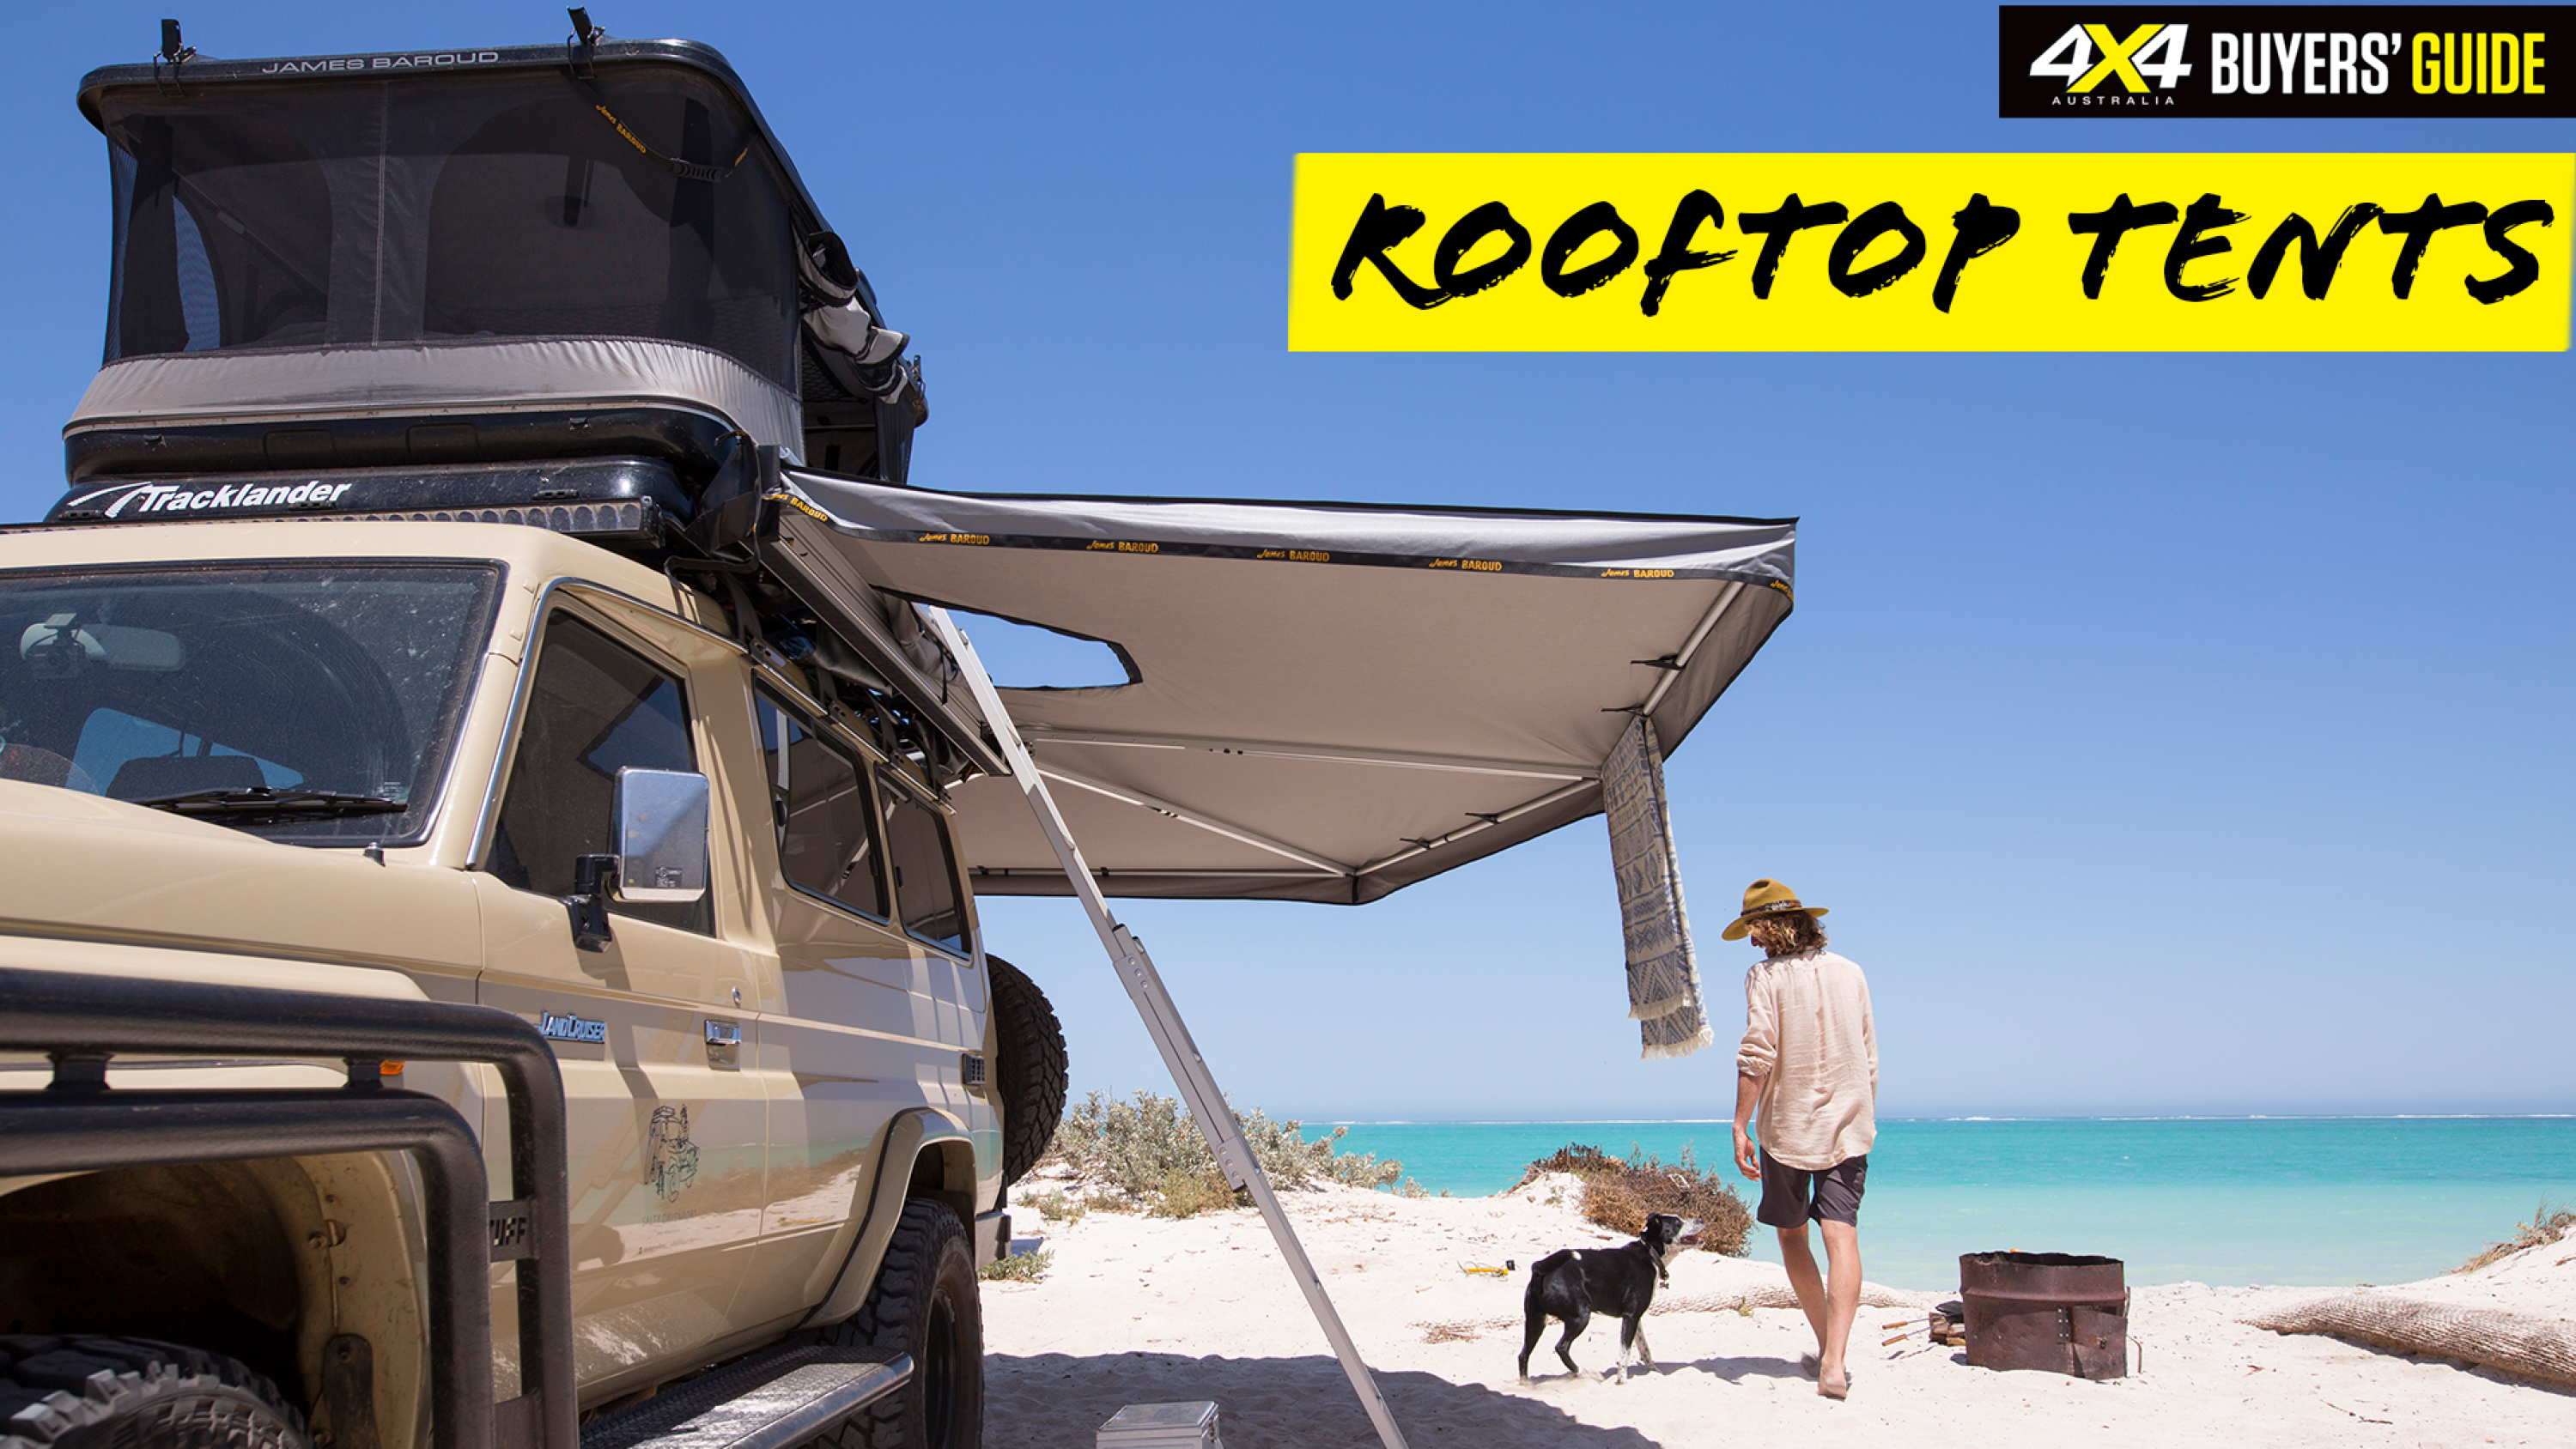 567d13bf/4x4 buyersguide rooftop tents png